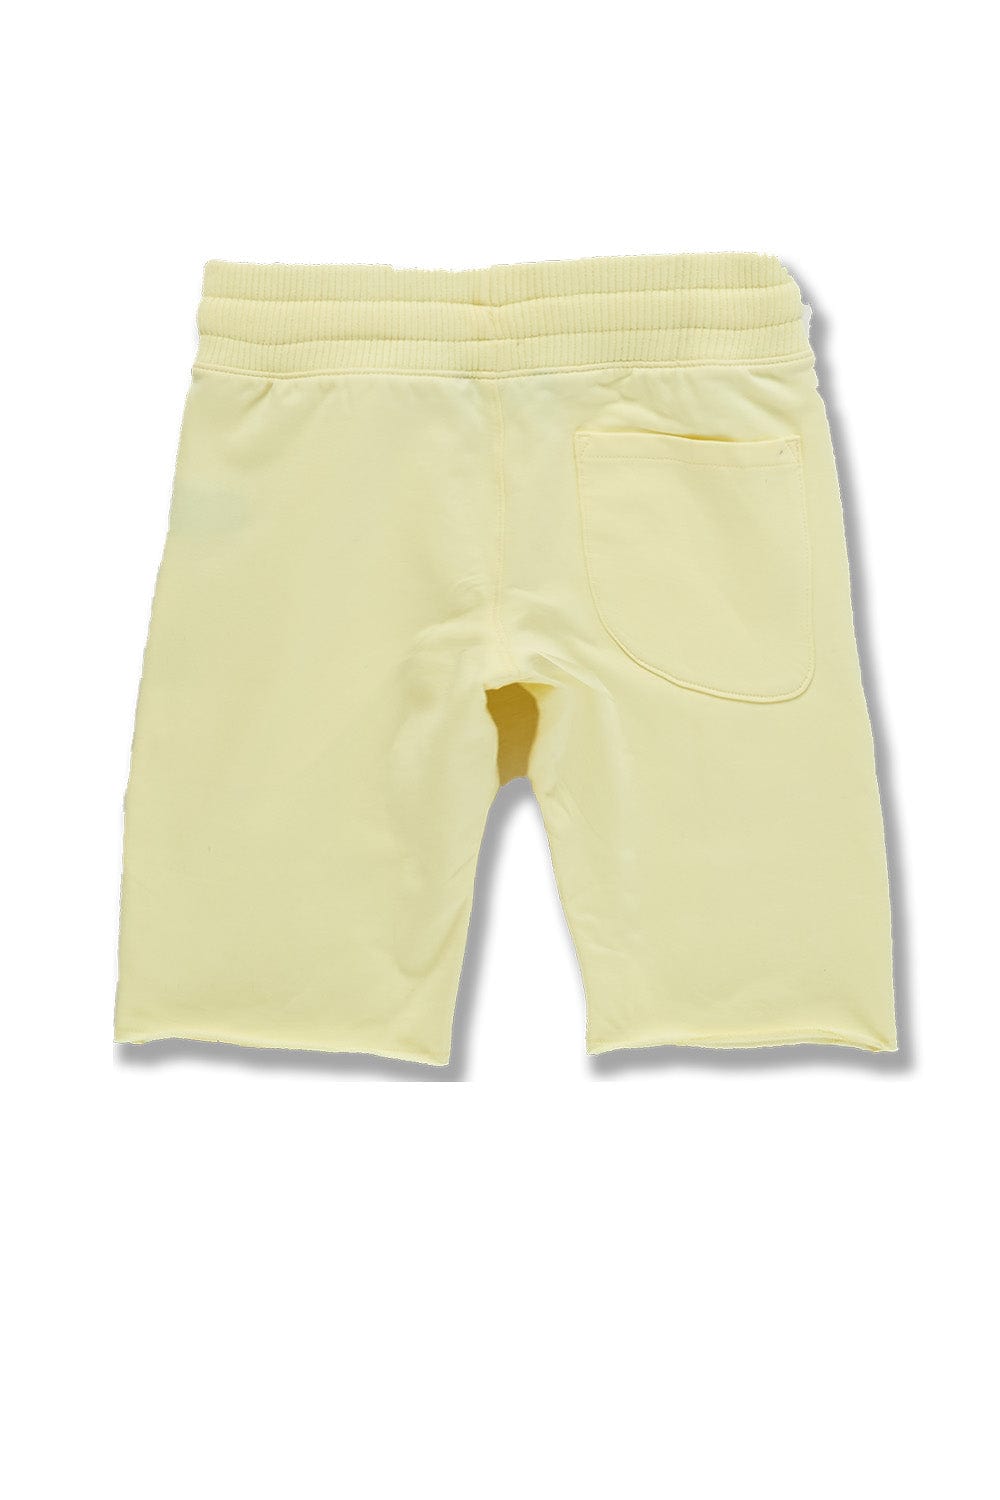 JC Kids Kids Palma French Terry Shorts (Exclusive Colors)